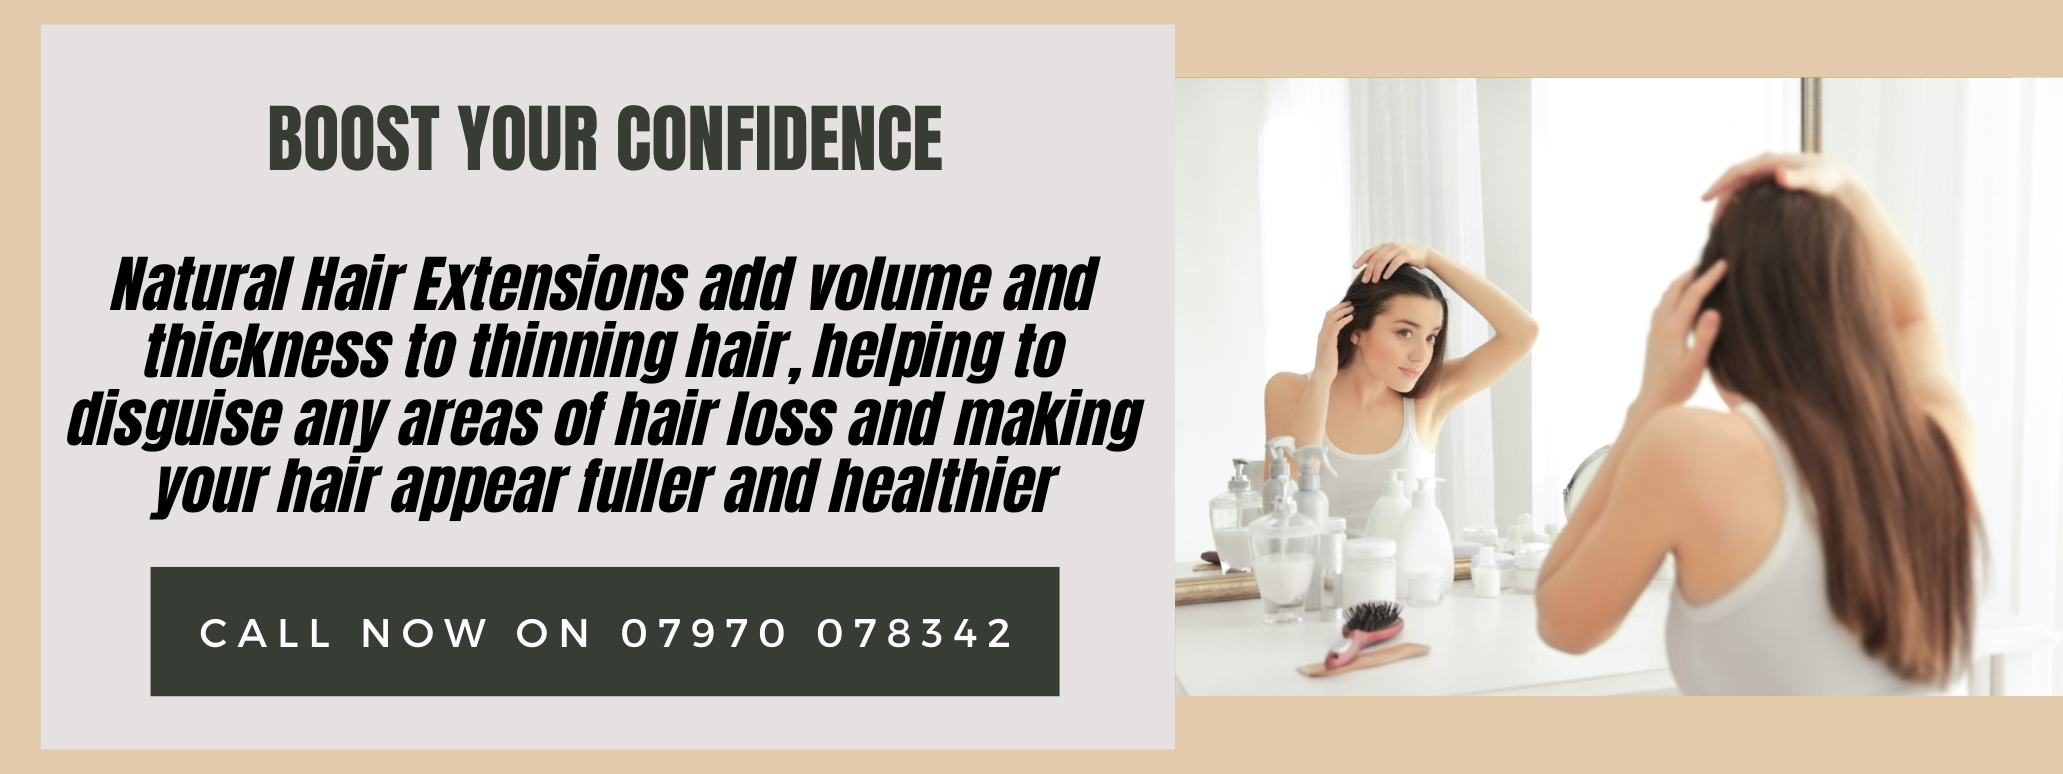 boost your confidence hair banner